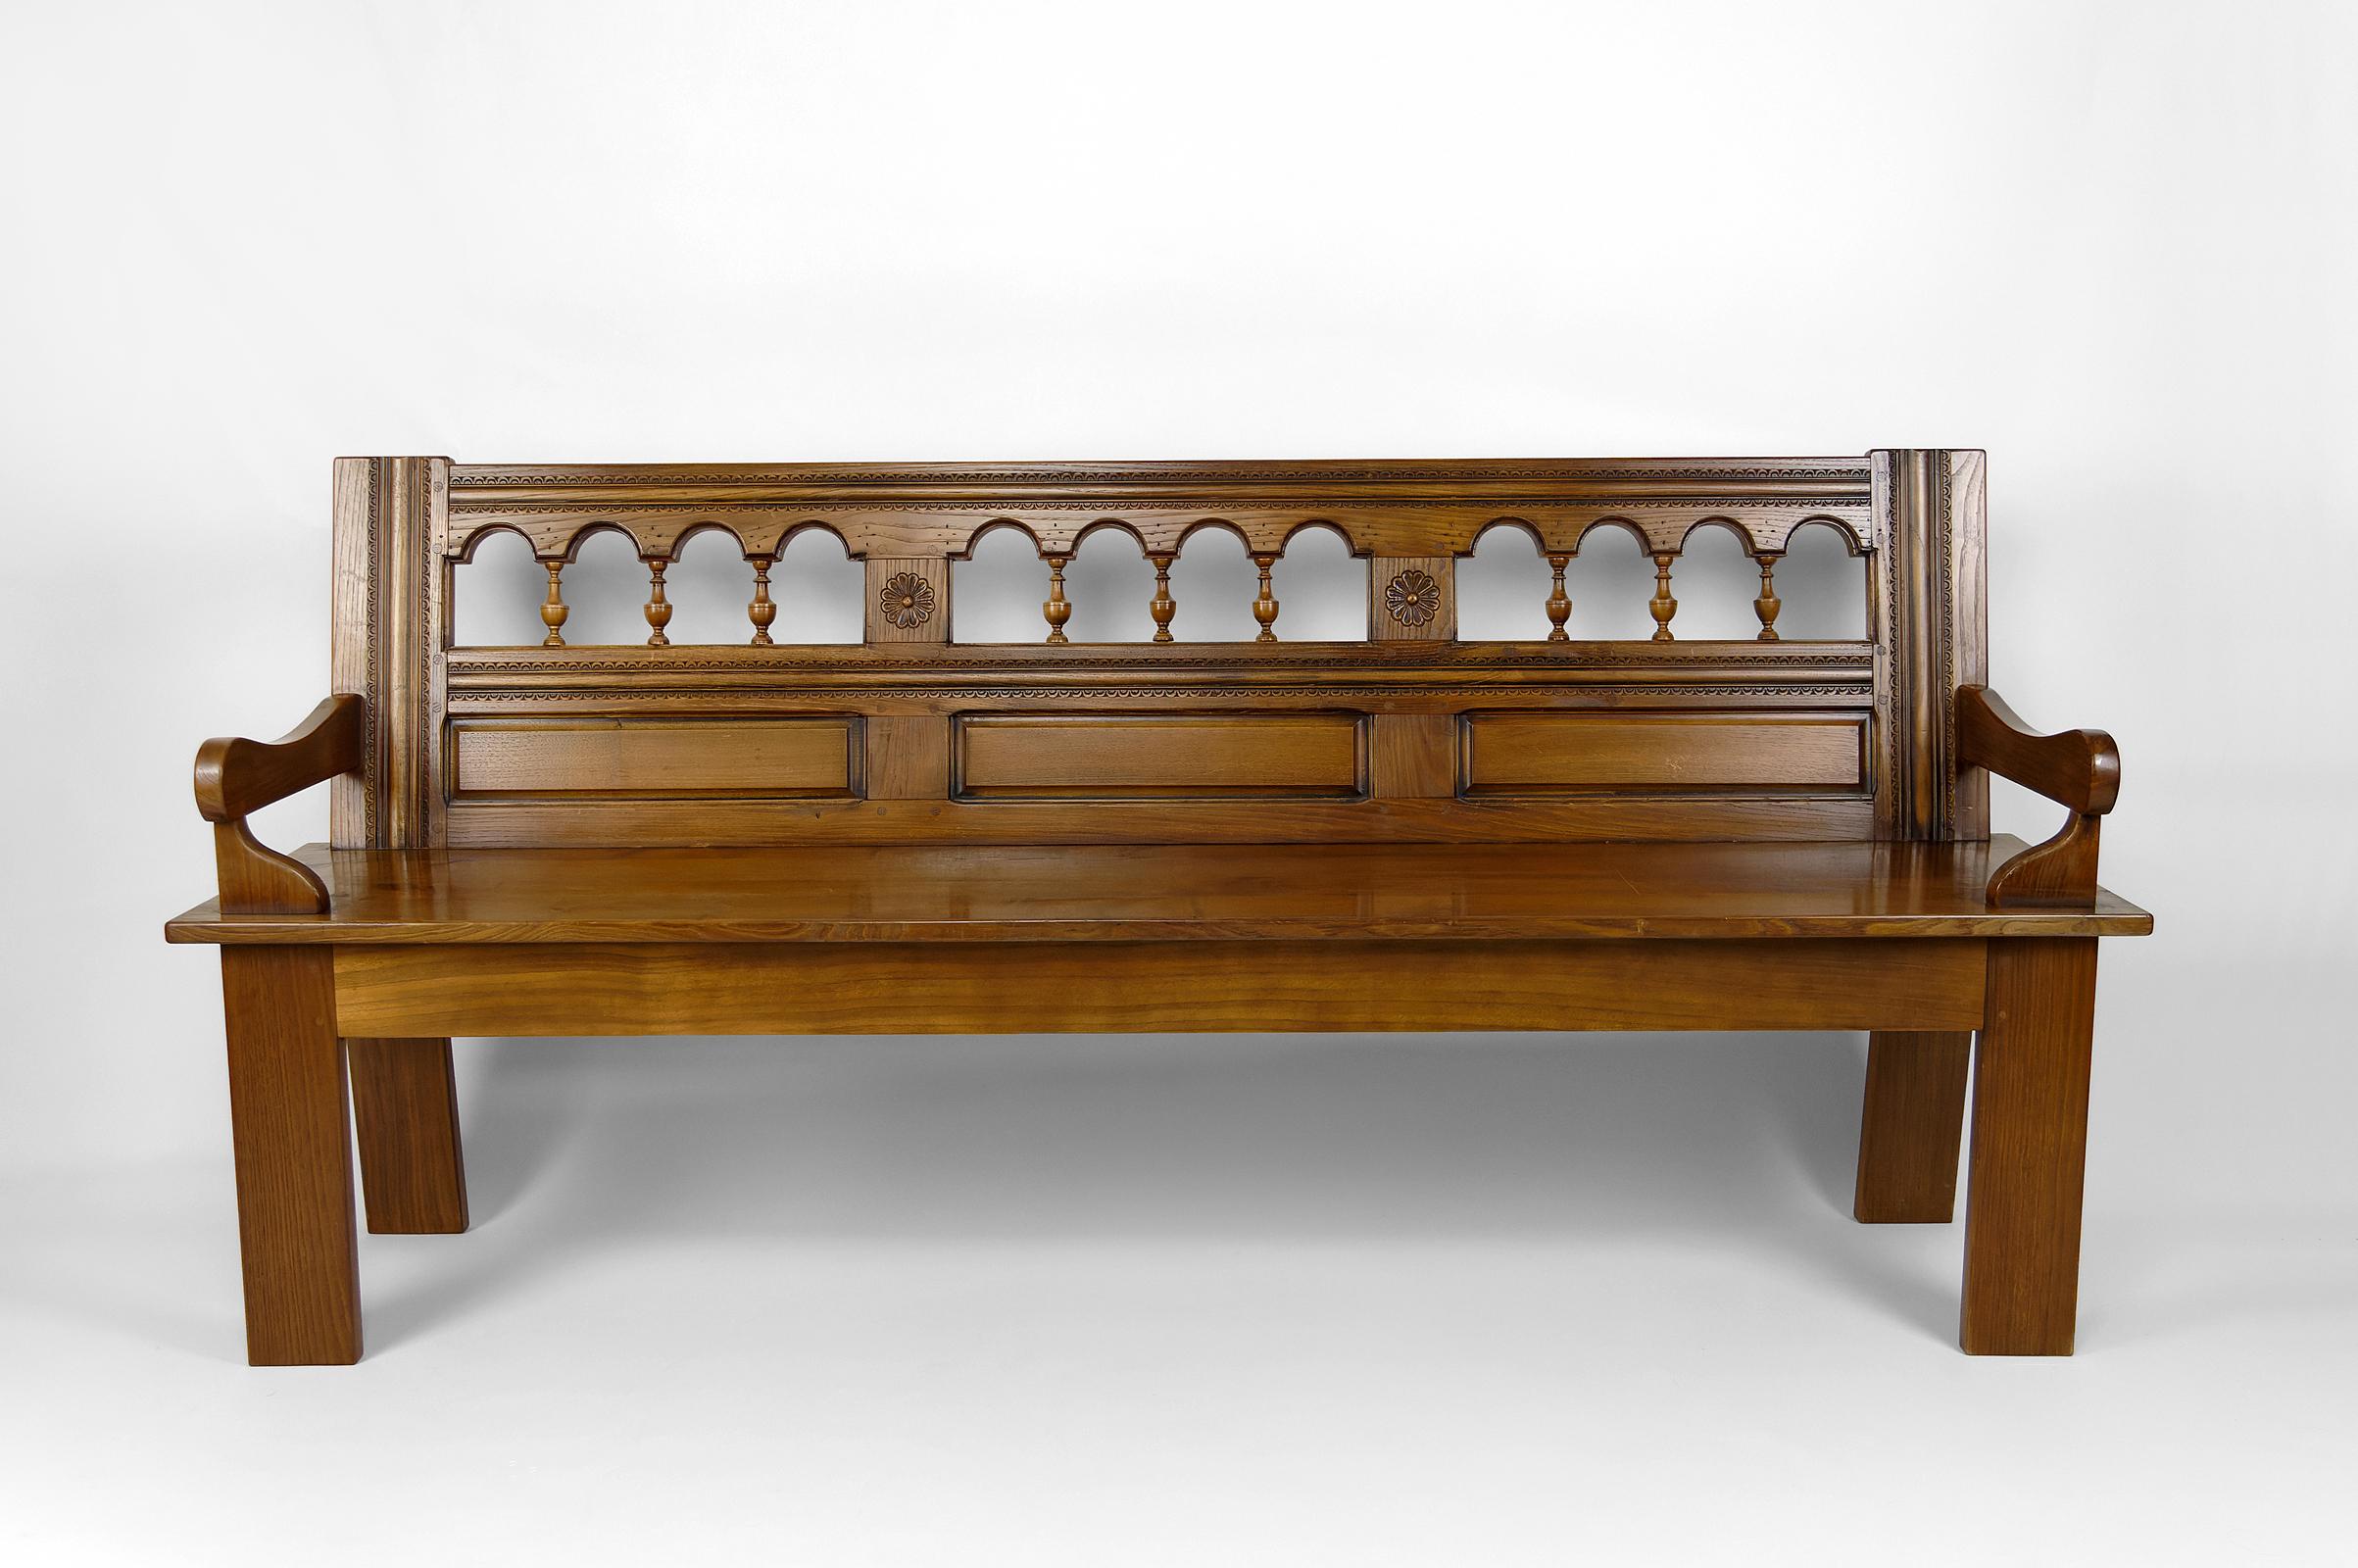 Nice oak farmhouse bench.
Back richly carved with geometric friezes, flowers / rosettes, colonnades and arches.
3 or 4 seats.

In good condition.

Rustic / French Provincial style, France, 20th century.

Total dimensions:
height 87cm
width